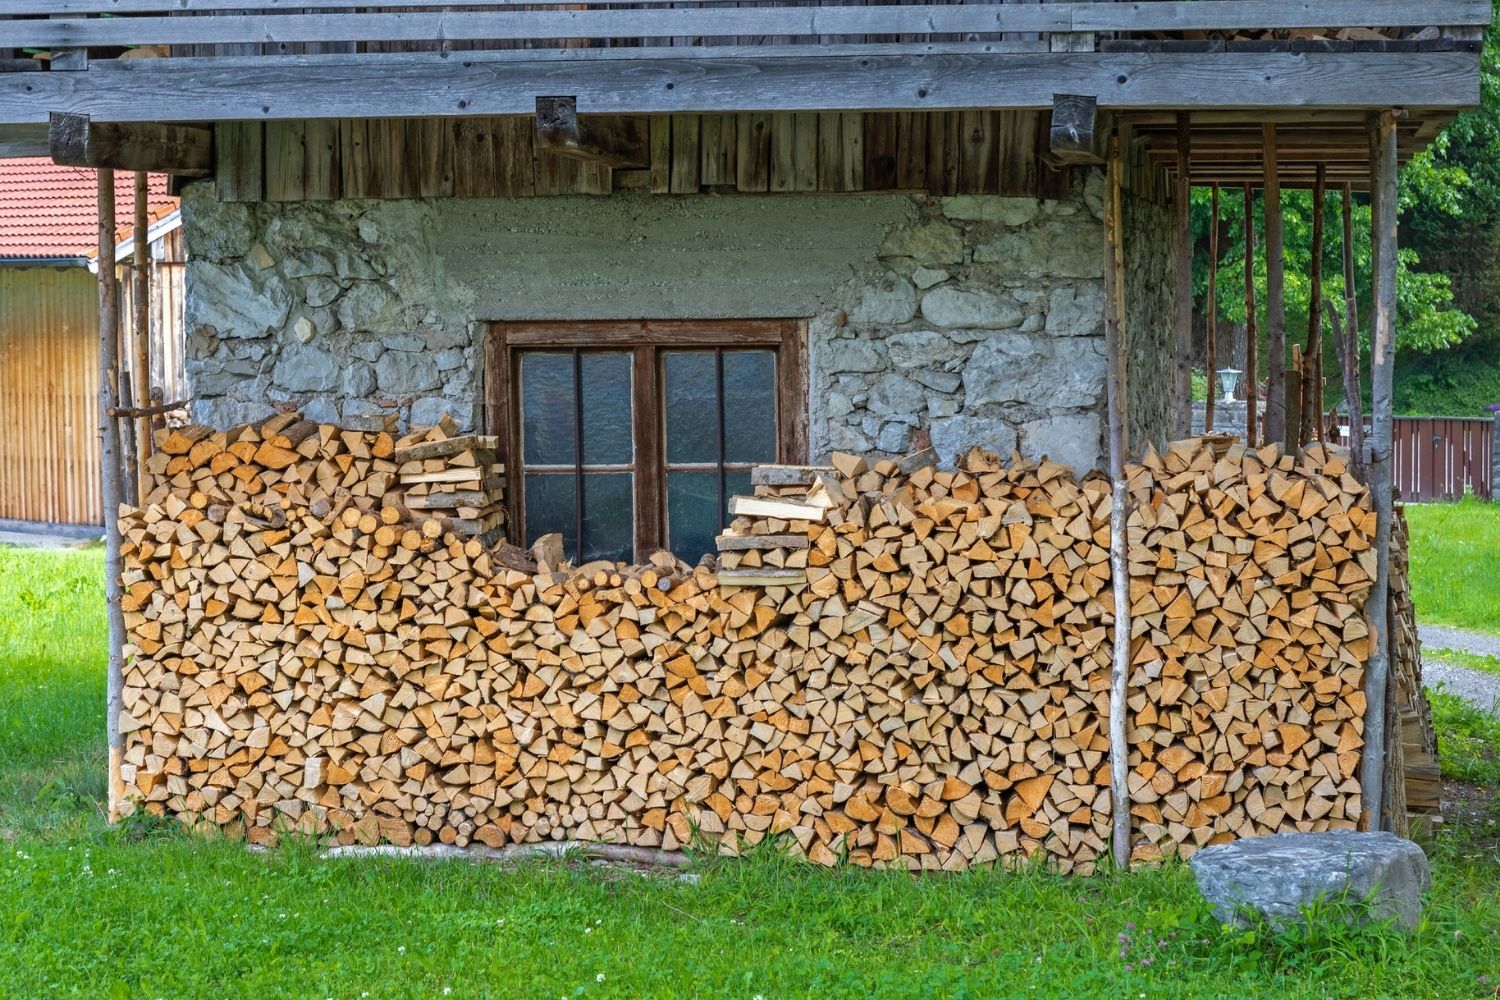 The Best Way of Air Circulation for Wood Stack